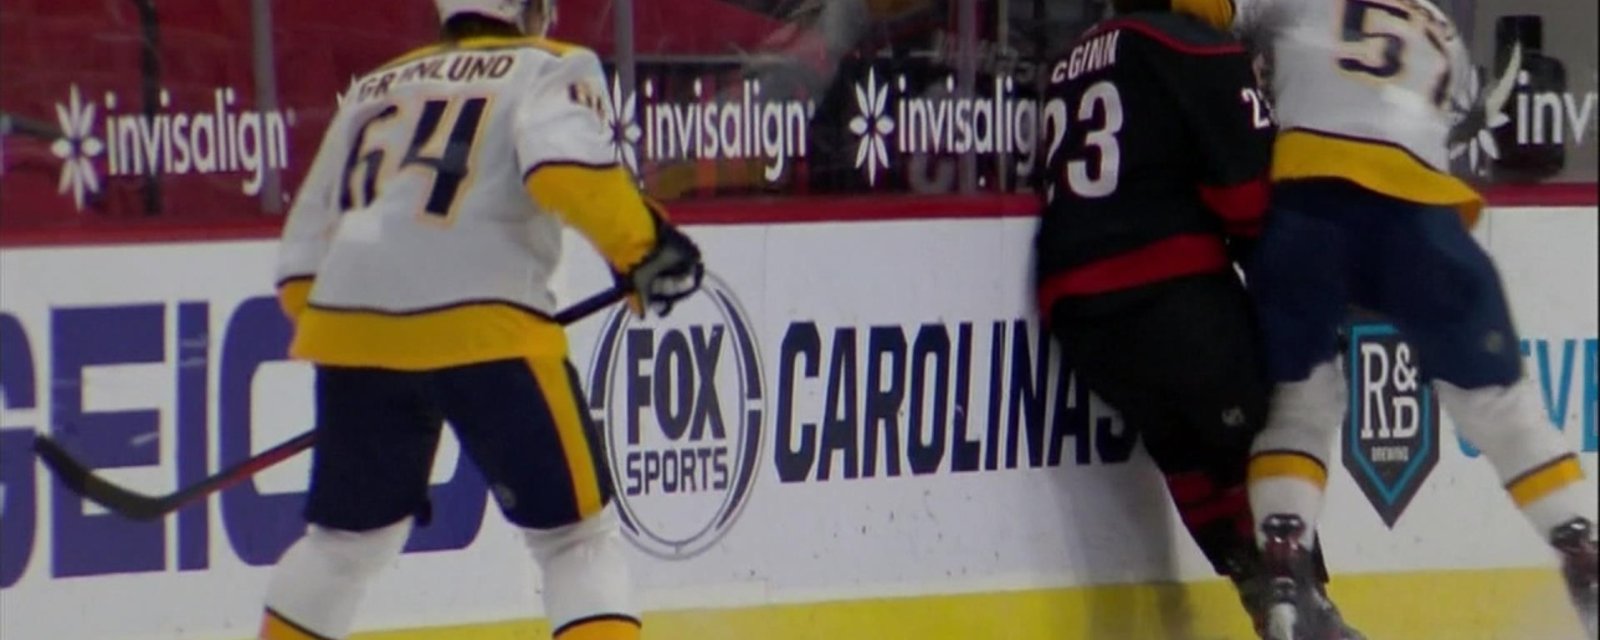 NHL suspends Fabbro for dangerous elbow to the head of McGinn